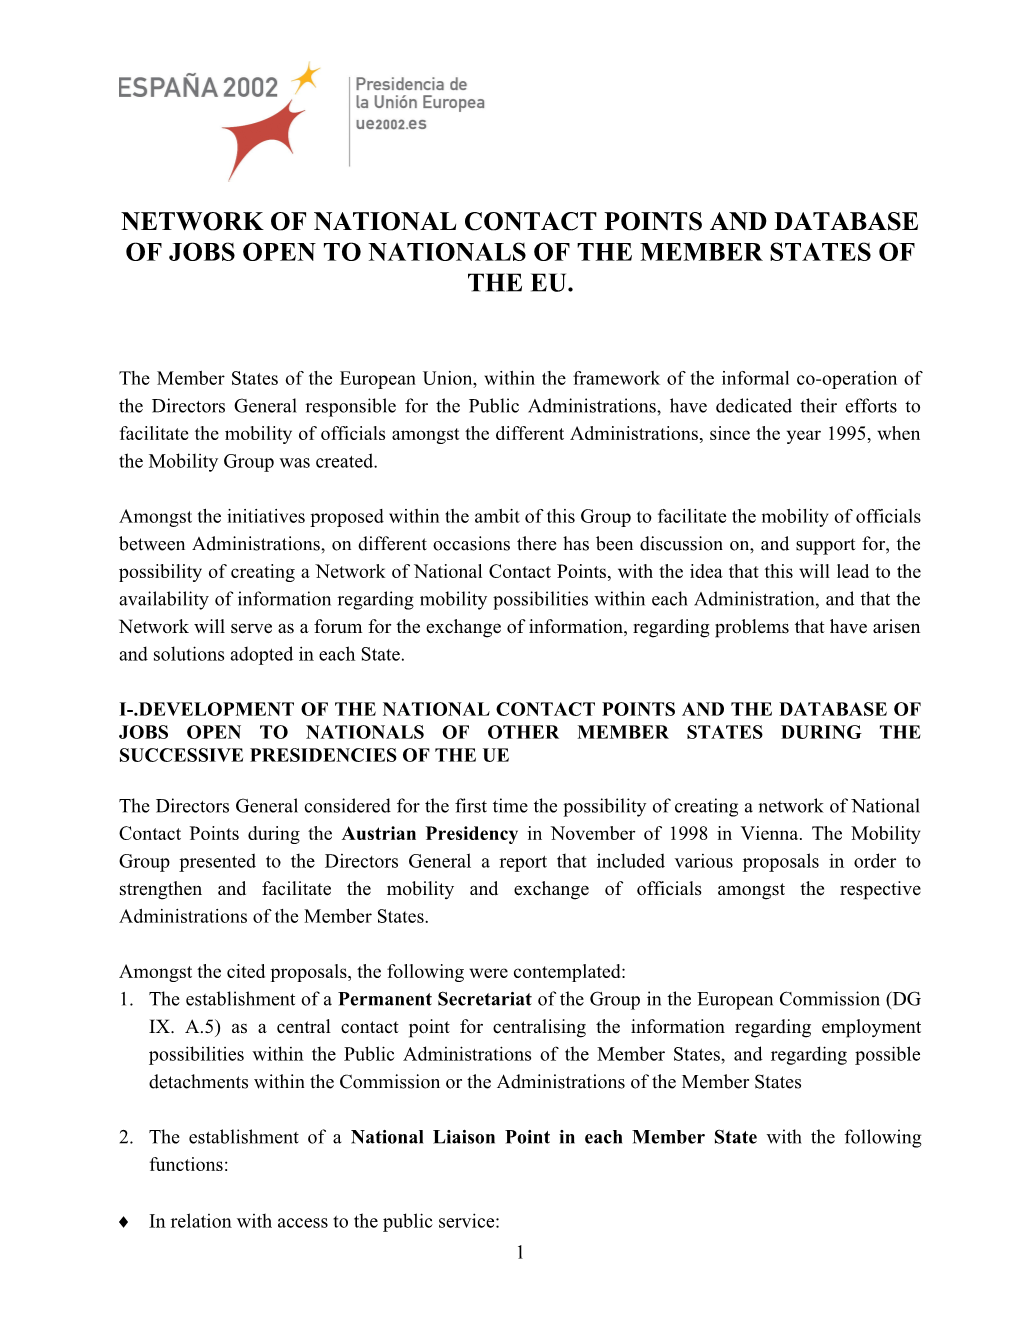 Network of National Contact Points and Database of Jobs Open to Nationals of the Member